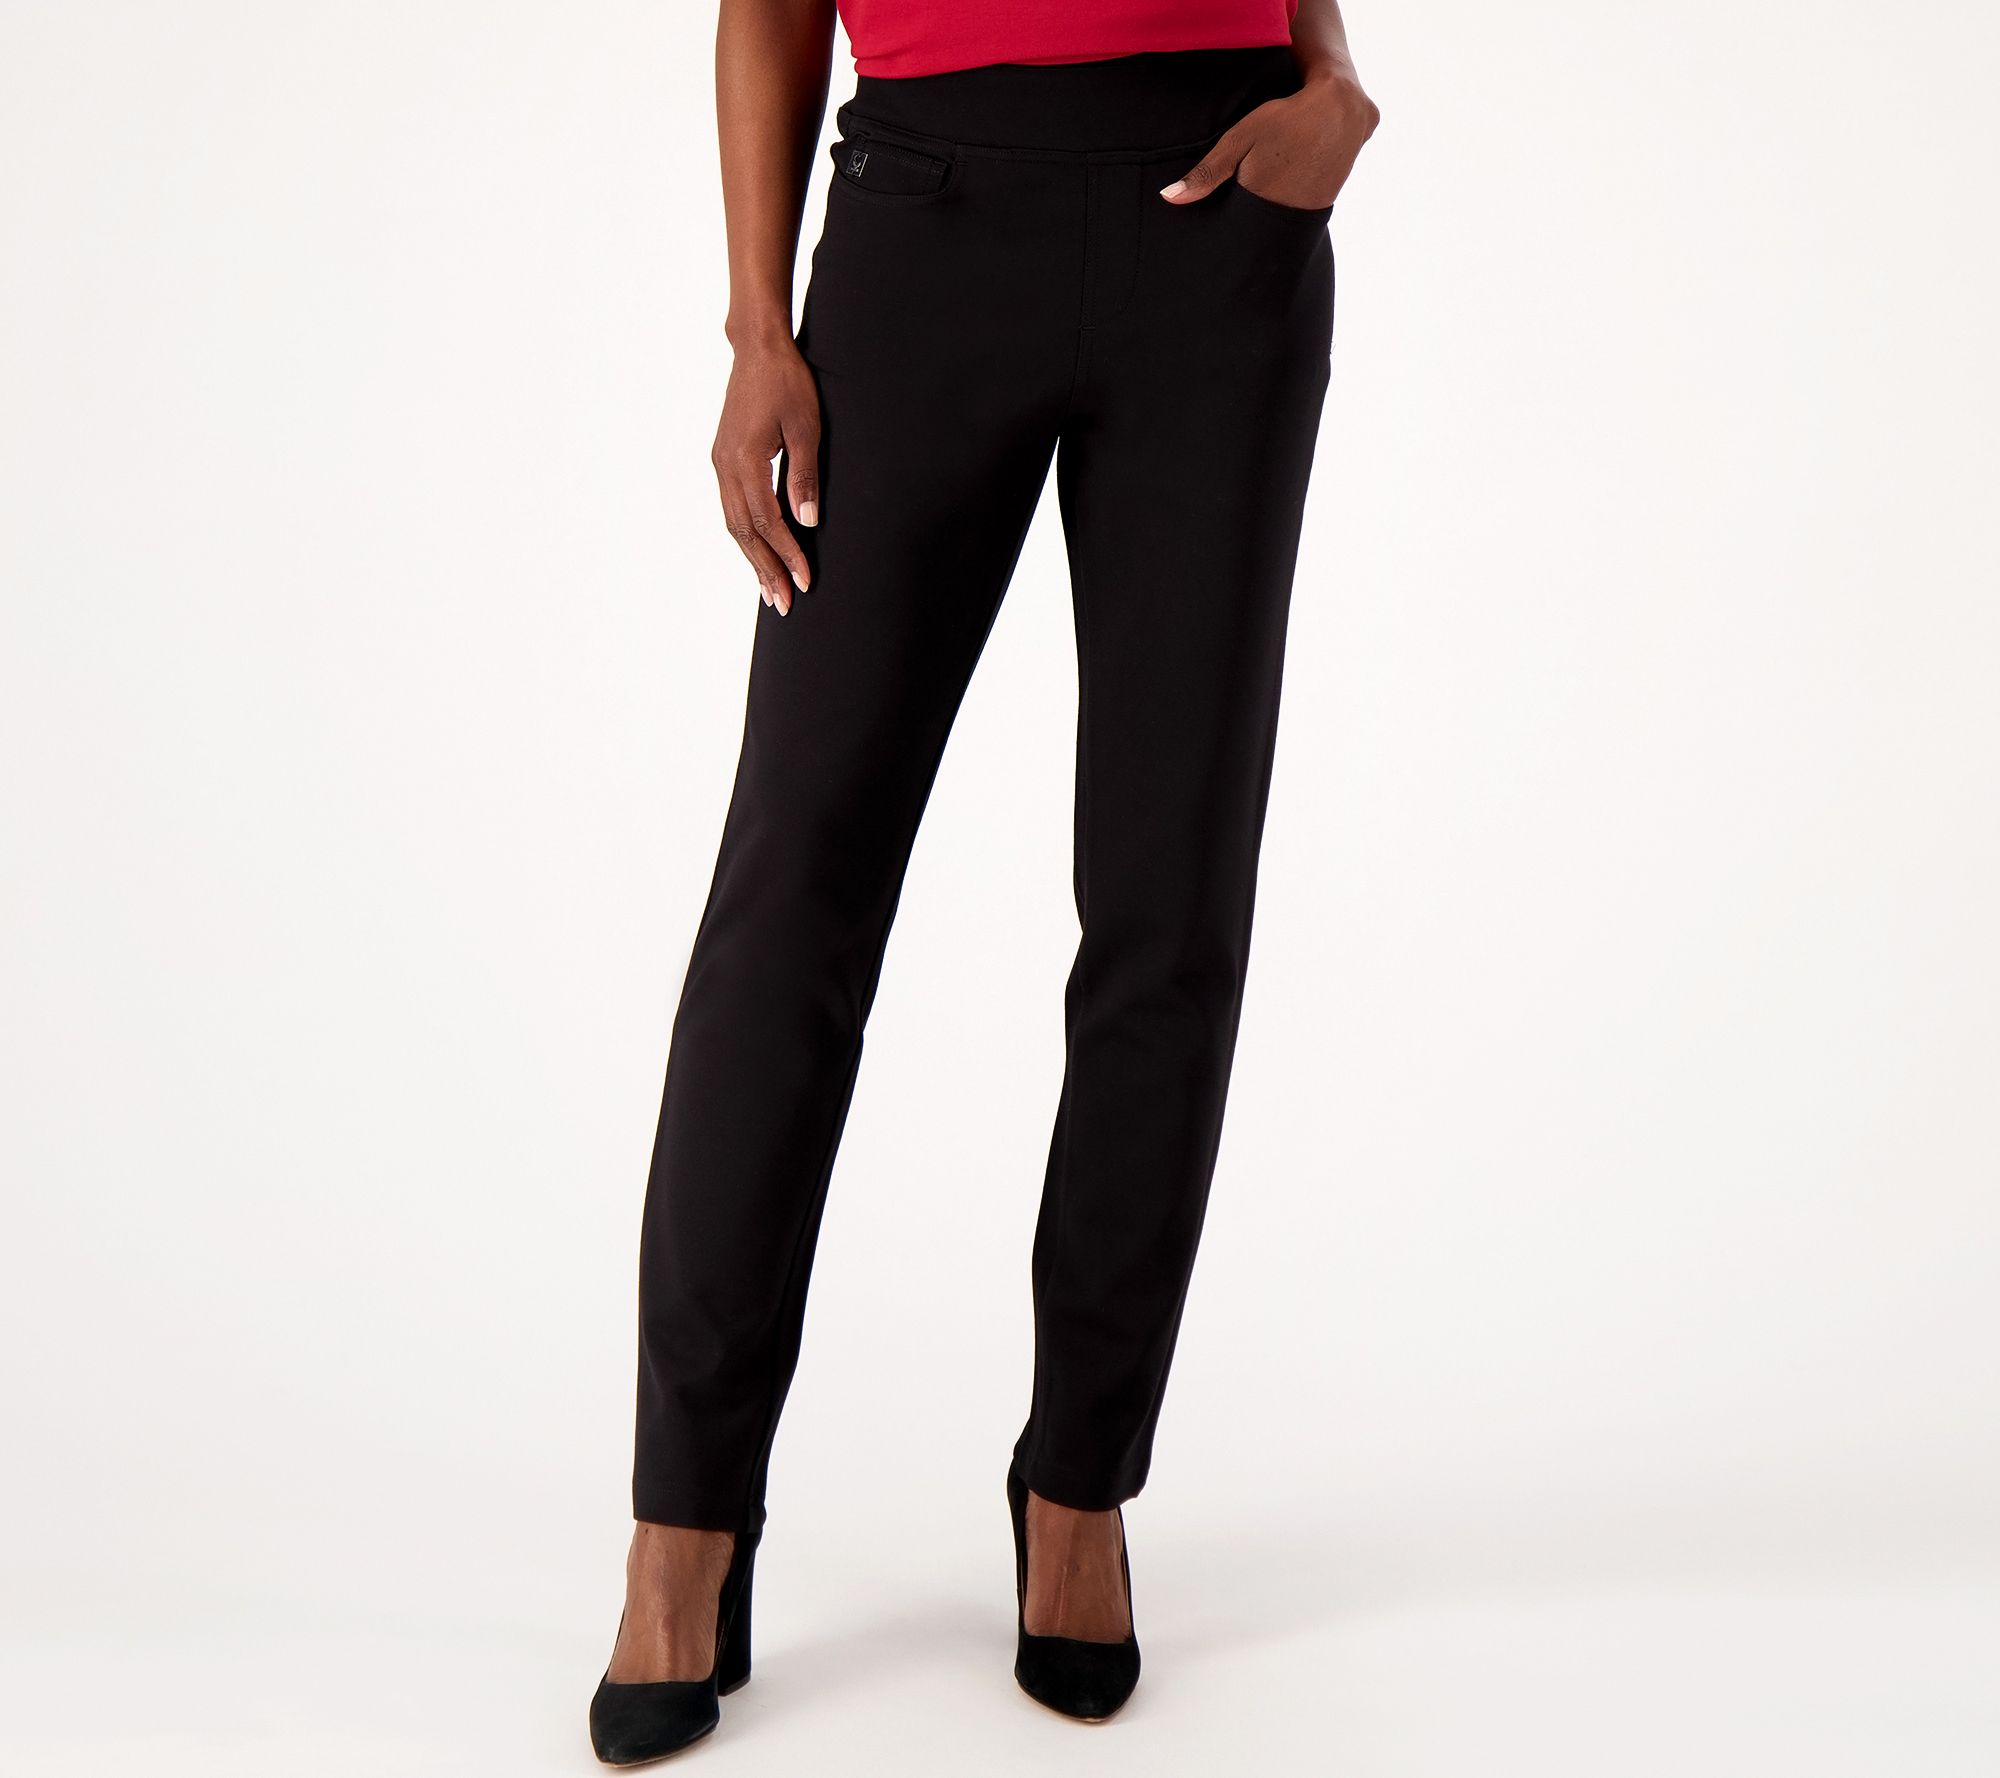 Uniqlo Singapore - Our new Ponte Slim Pants offers the comfort of